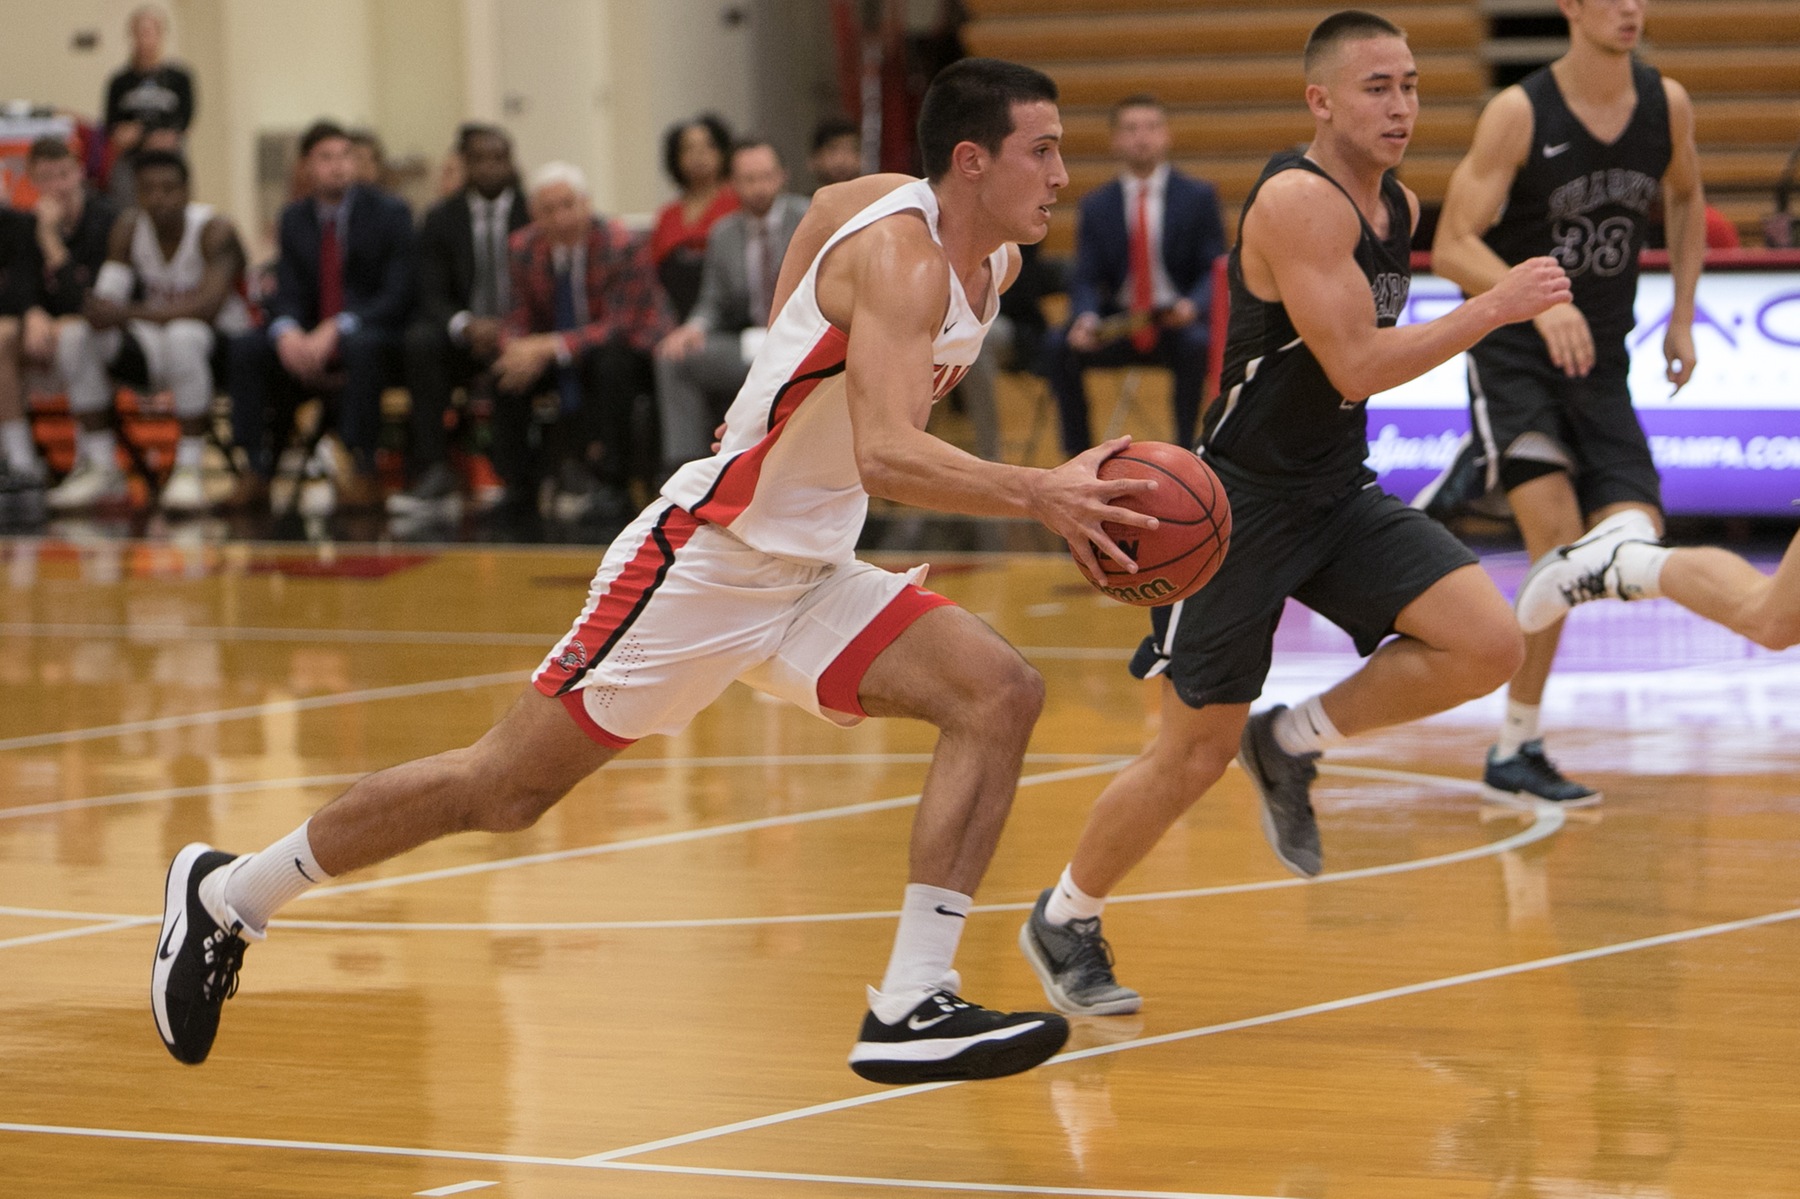 Men's Basketball Decidedly Upsets Embry-Riddle